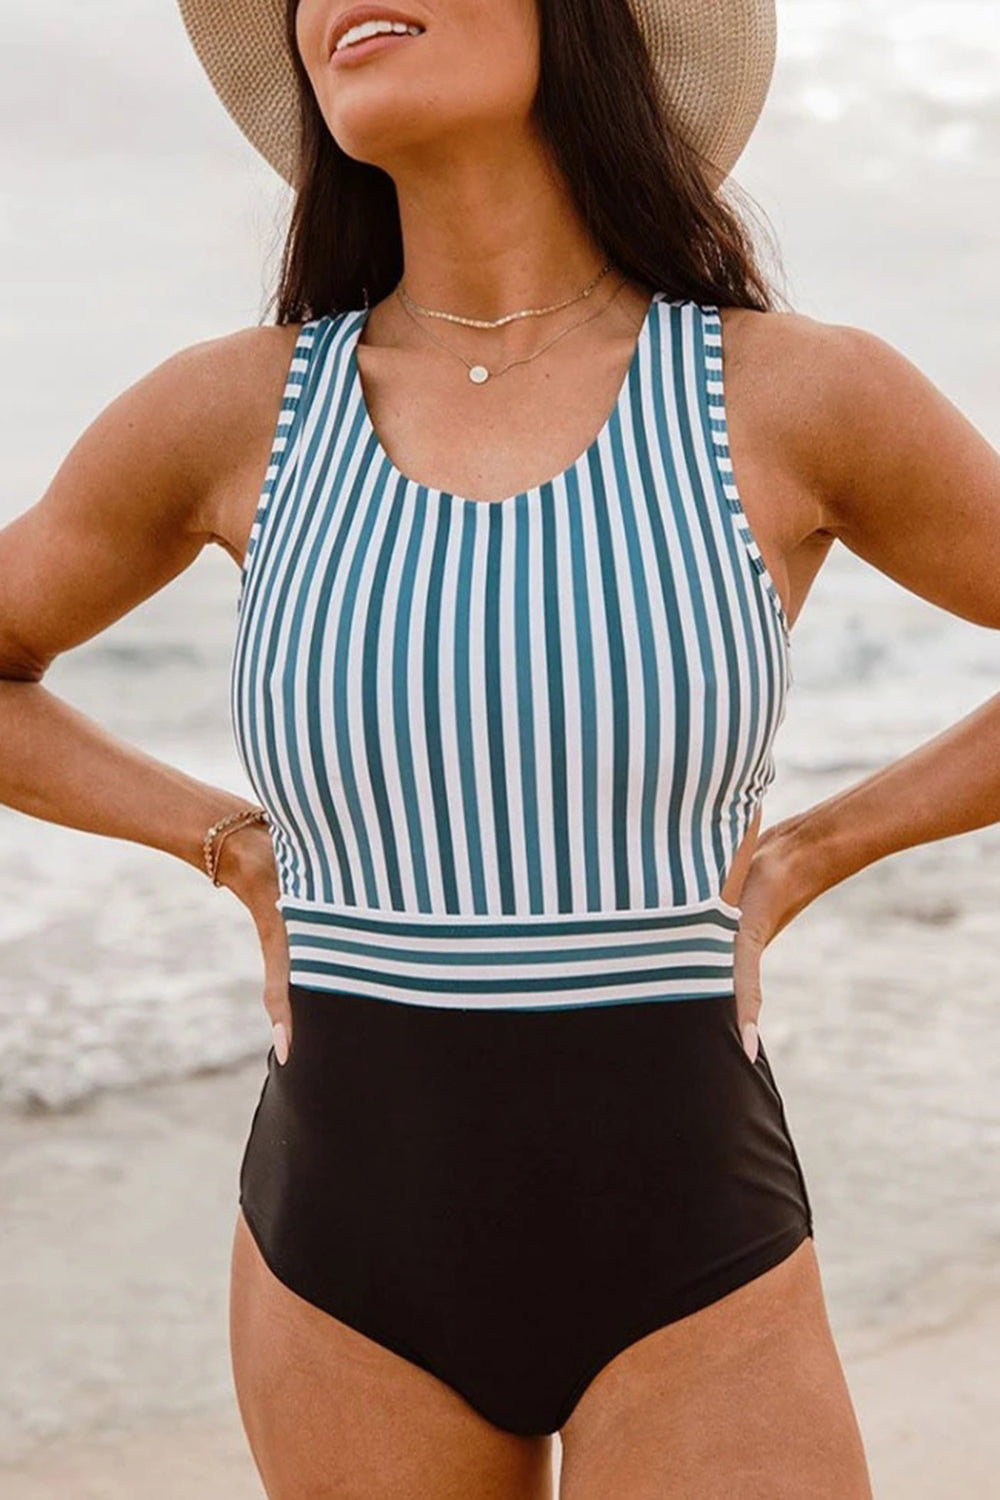 CONTRAST STRIPED KNOTTED CUTOUT BACK ONE PIECE SWIMSUIT